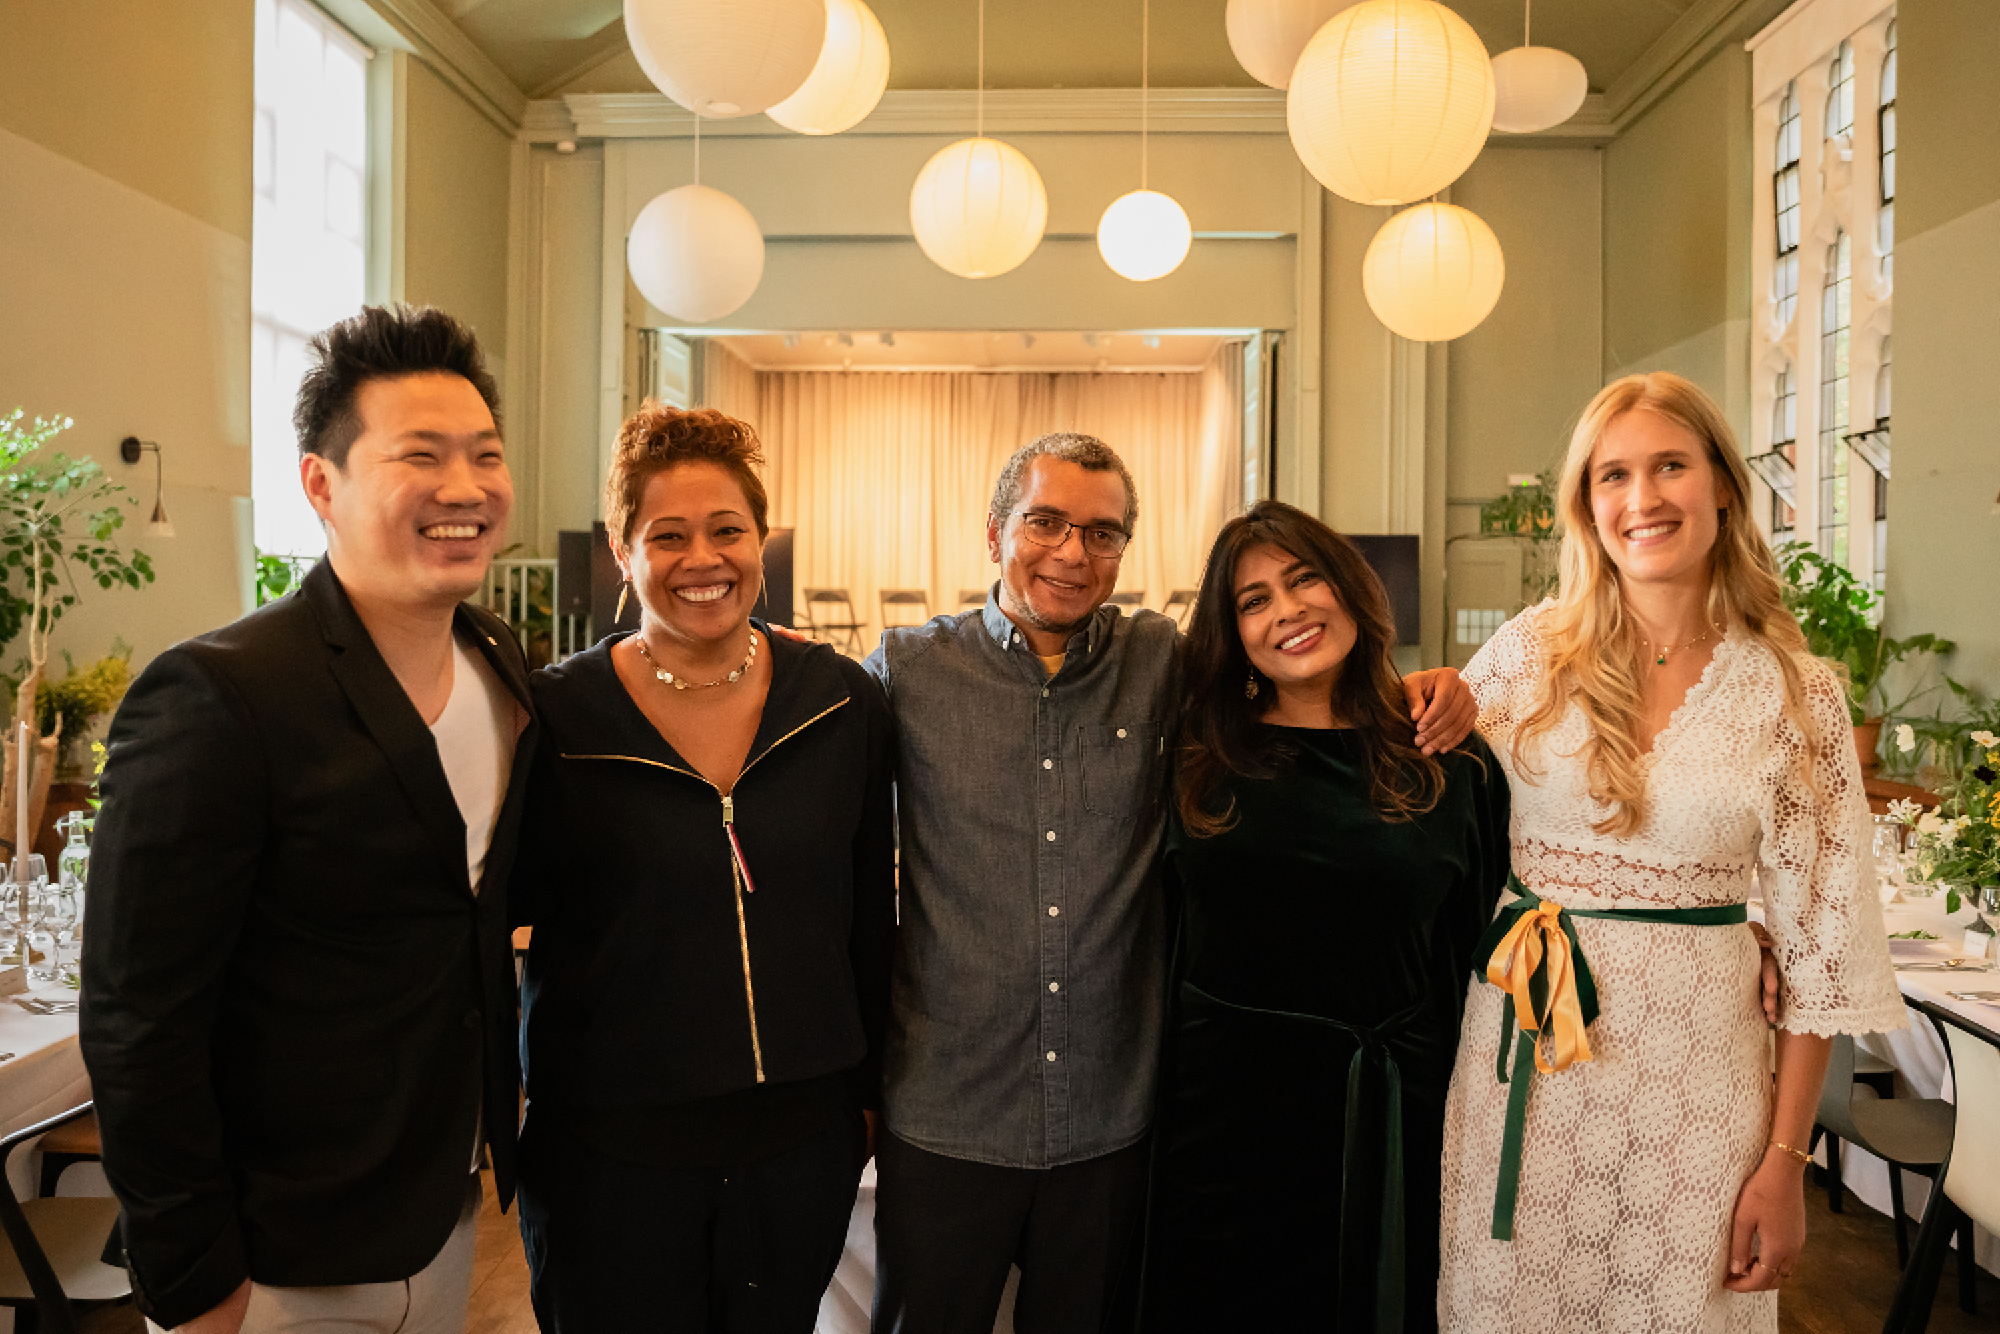 The Cobra Collective. From left to right: Michelin chef Andrew Wong, MasterChef host Monica Galetti, beer sommelier Ed Hughes, restaurateur Nisha Katona MBE, and content creator, Alexandra Dudley